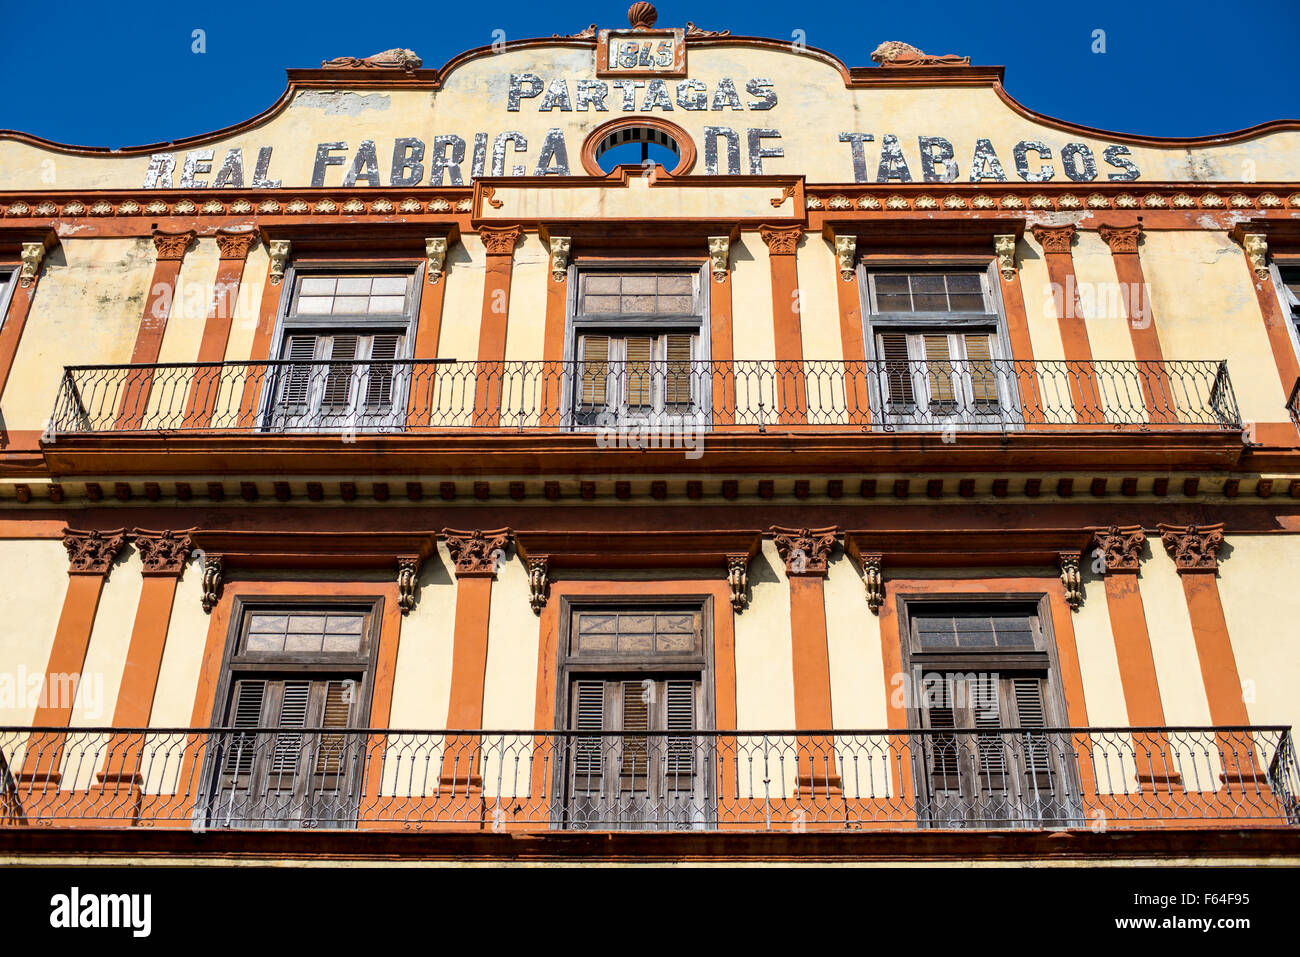 The old, striped Partagas Cigar factory with balconies in Havana, Cuba Stock Photo